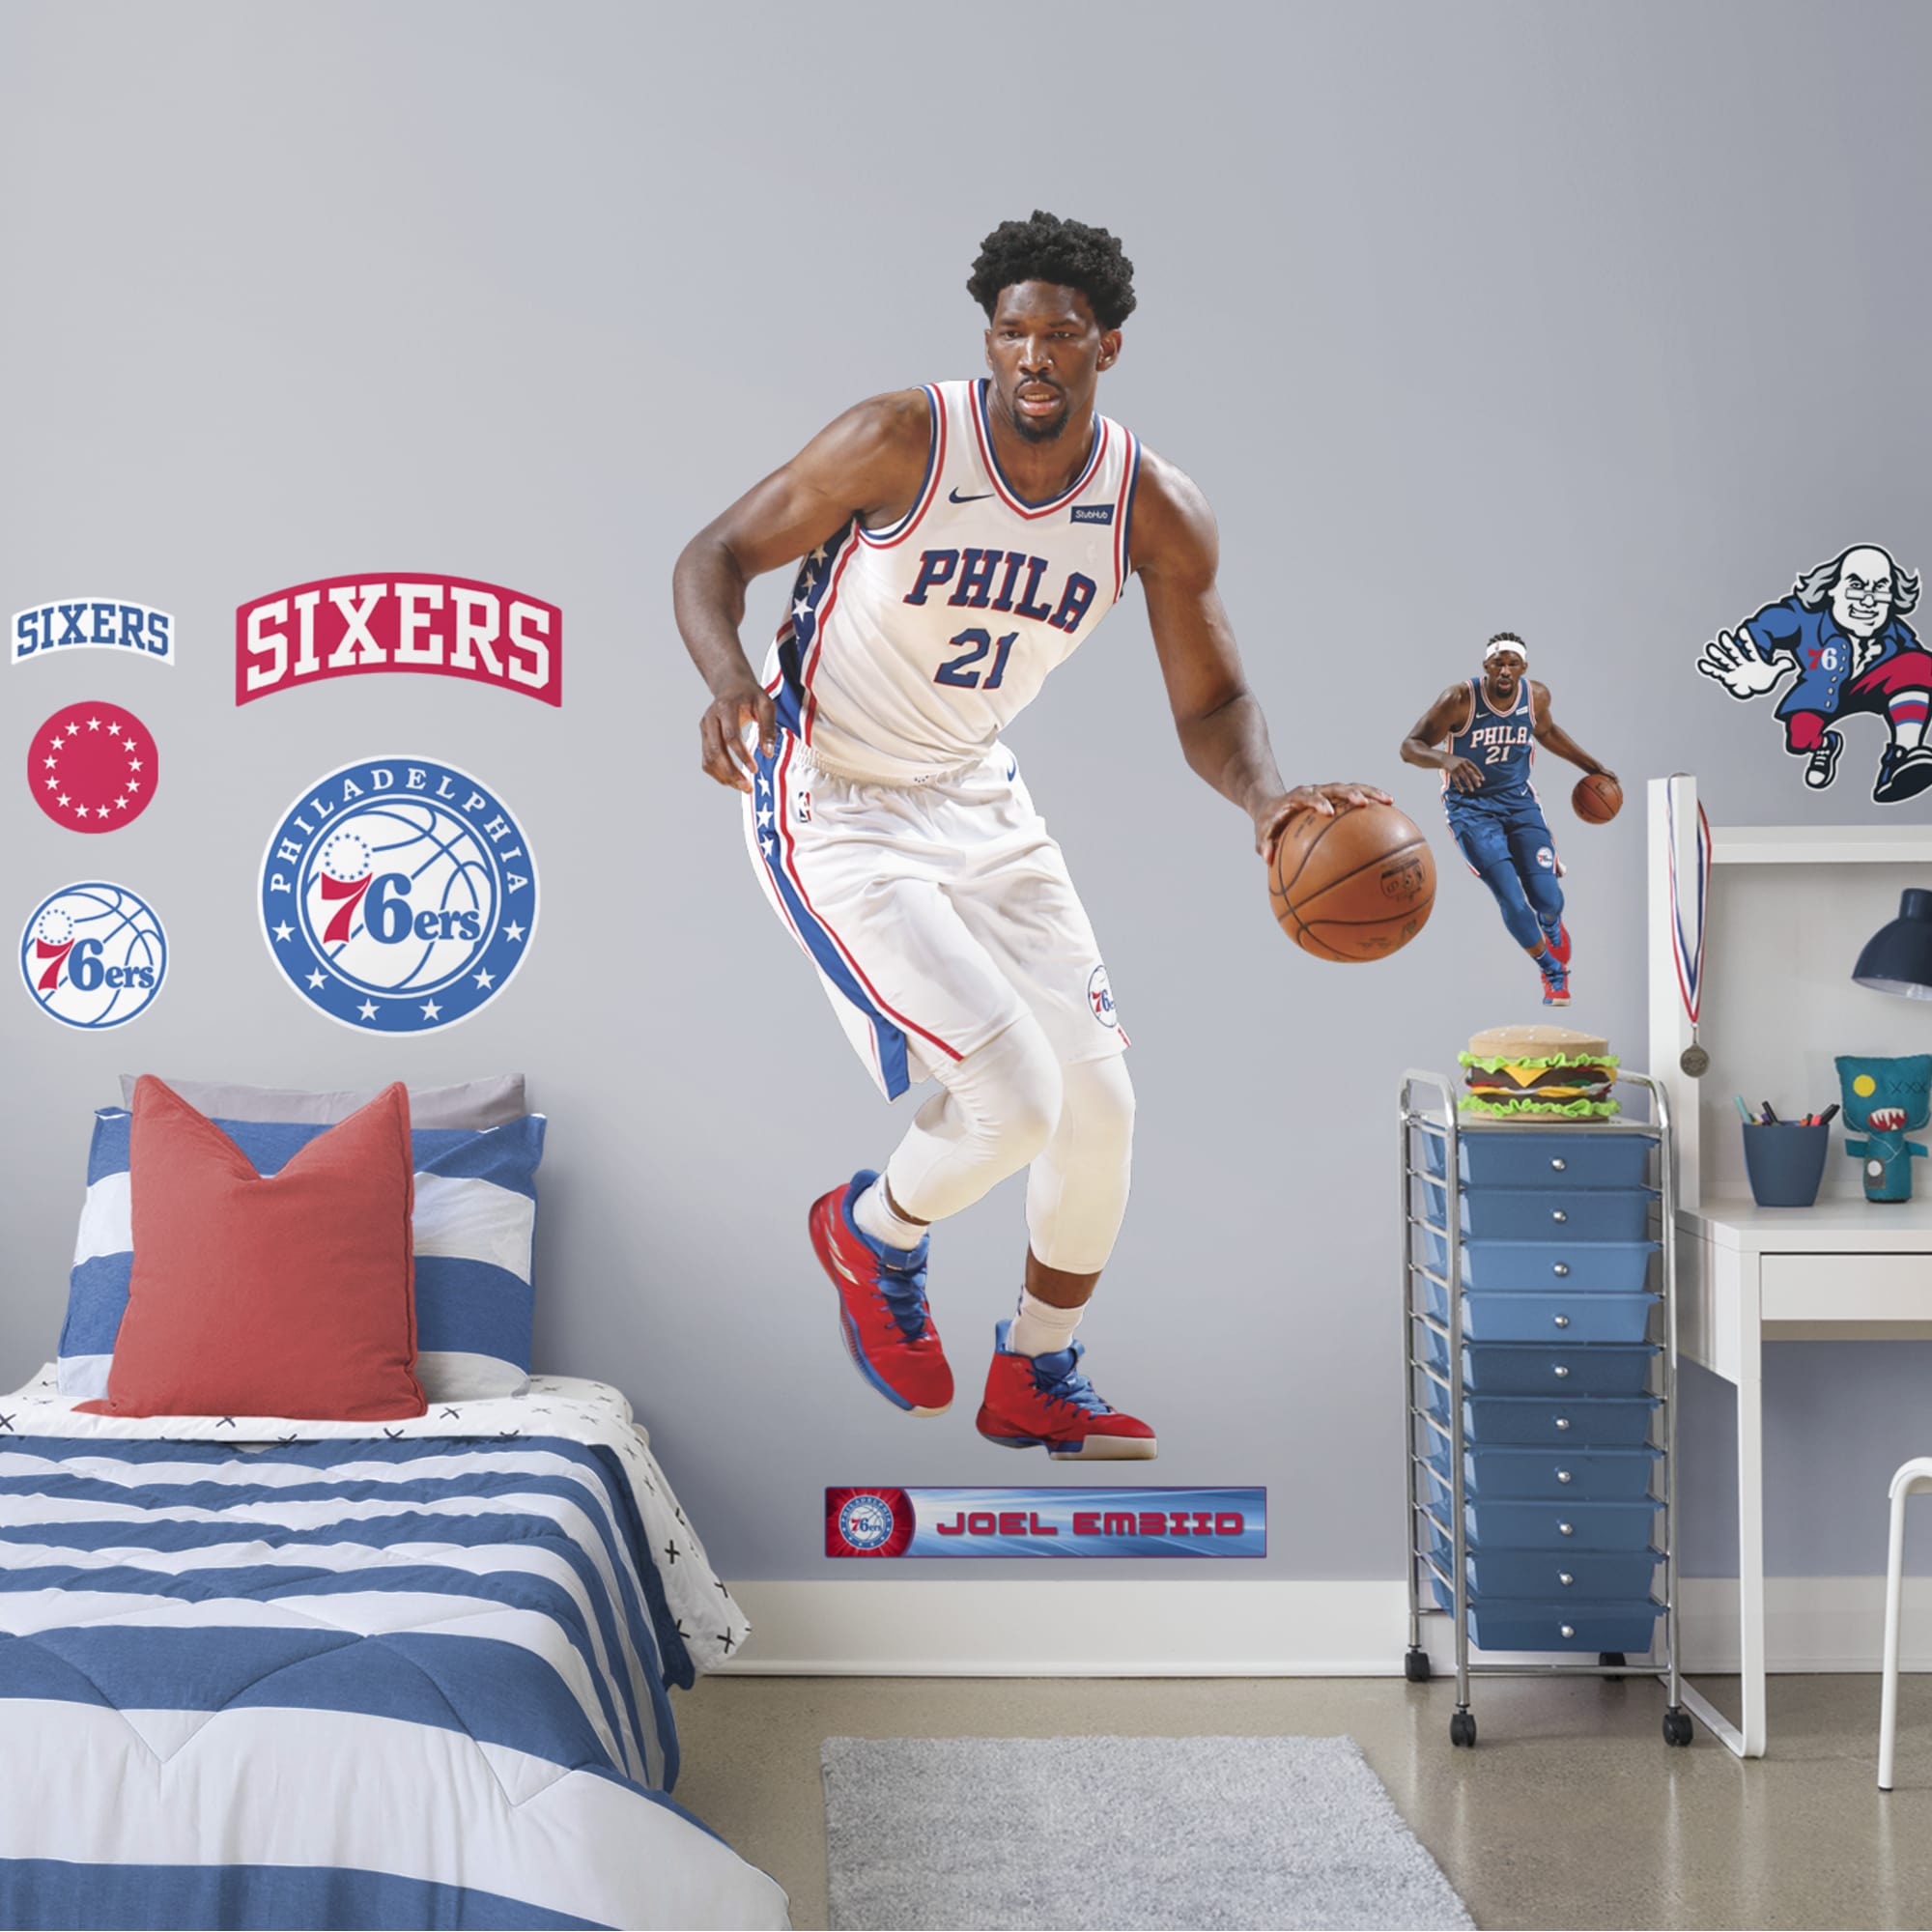 Joel Embiid for Philadelphia 76ers - Officially Licensed NBA Removable Wall Decal Life-Size Athlete + 9 Decals (48"W x 78"H) by